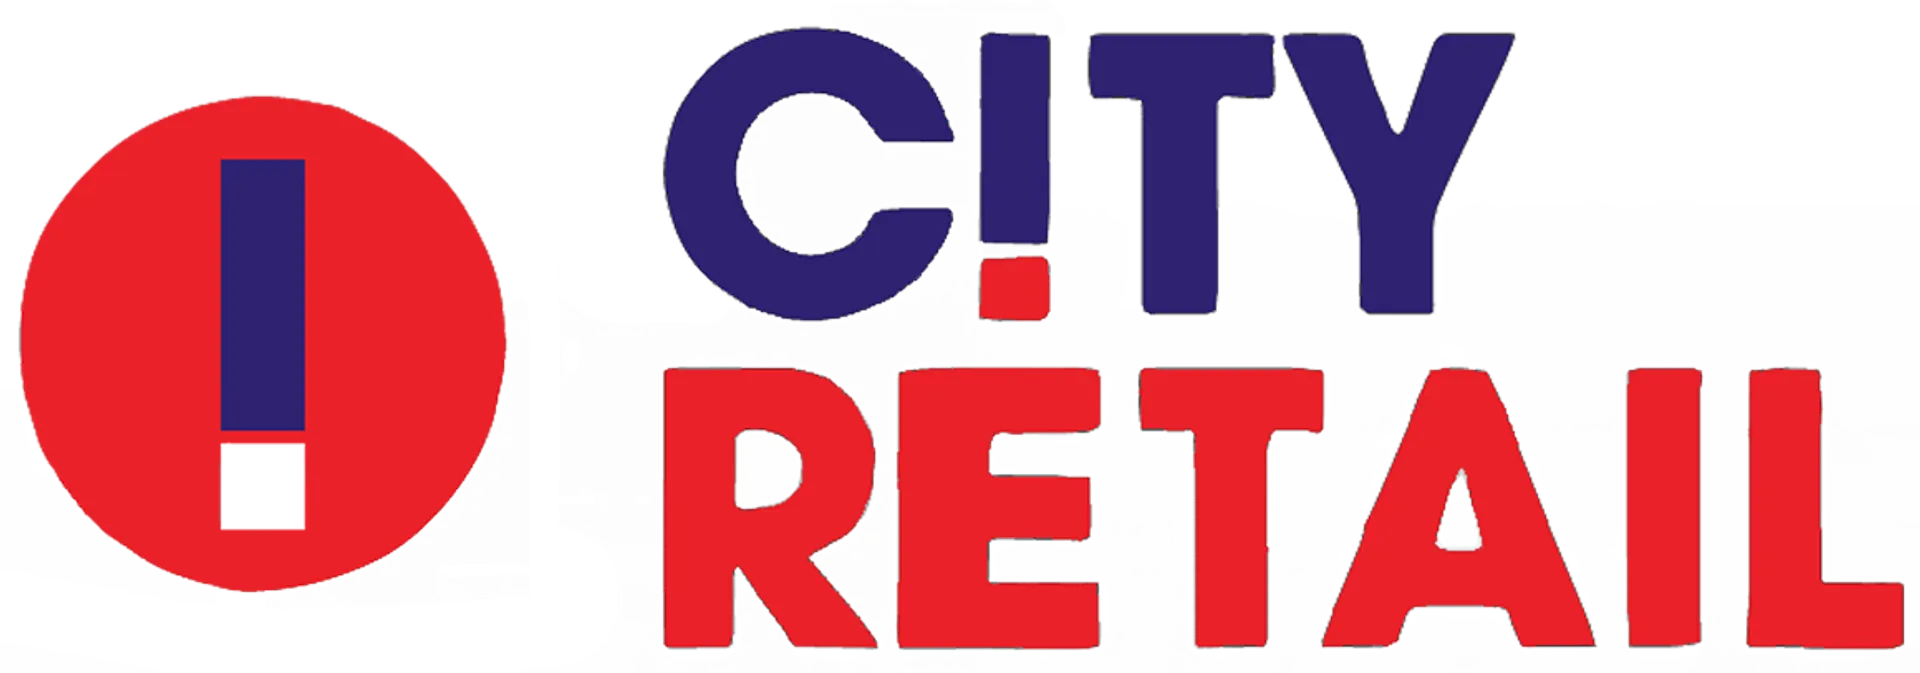 CITY RETAIL SUPERMARKET logo. Current weekly ad